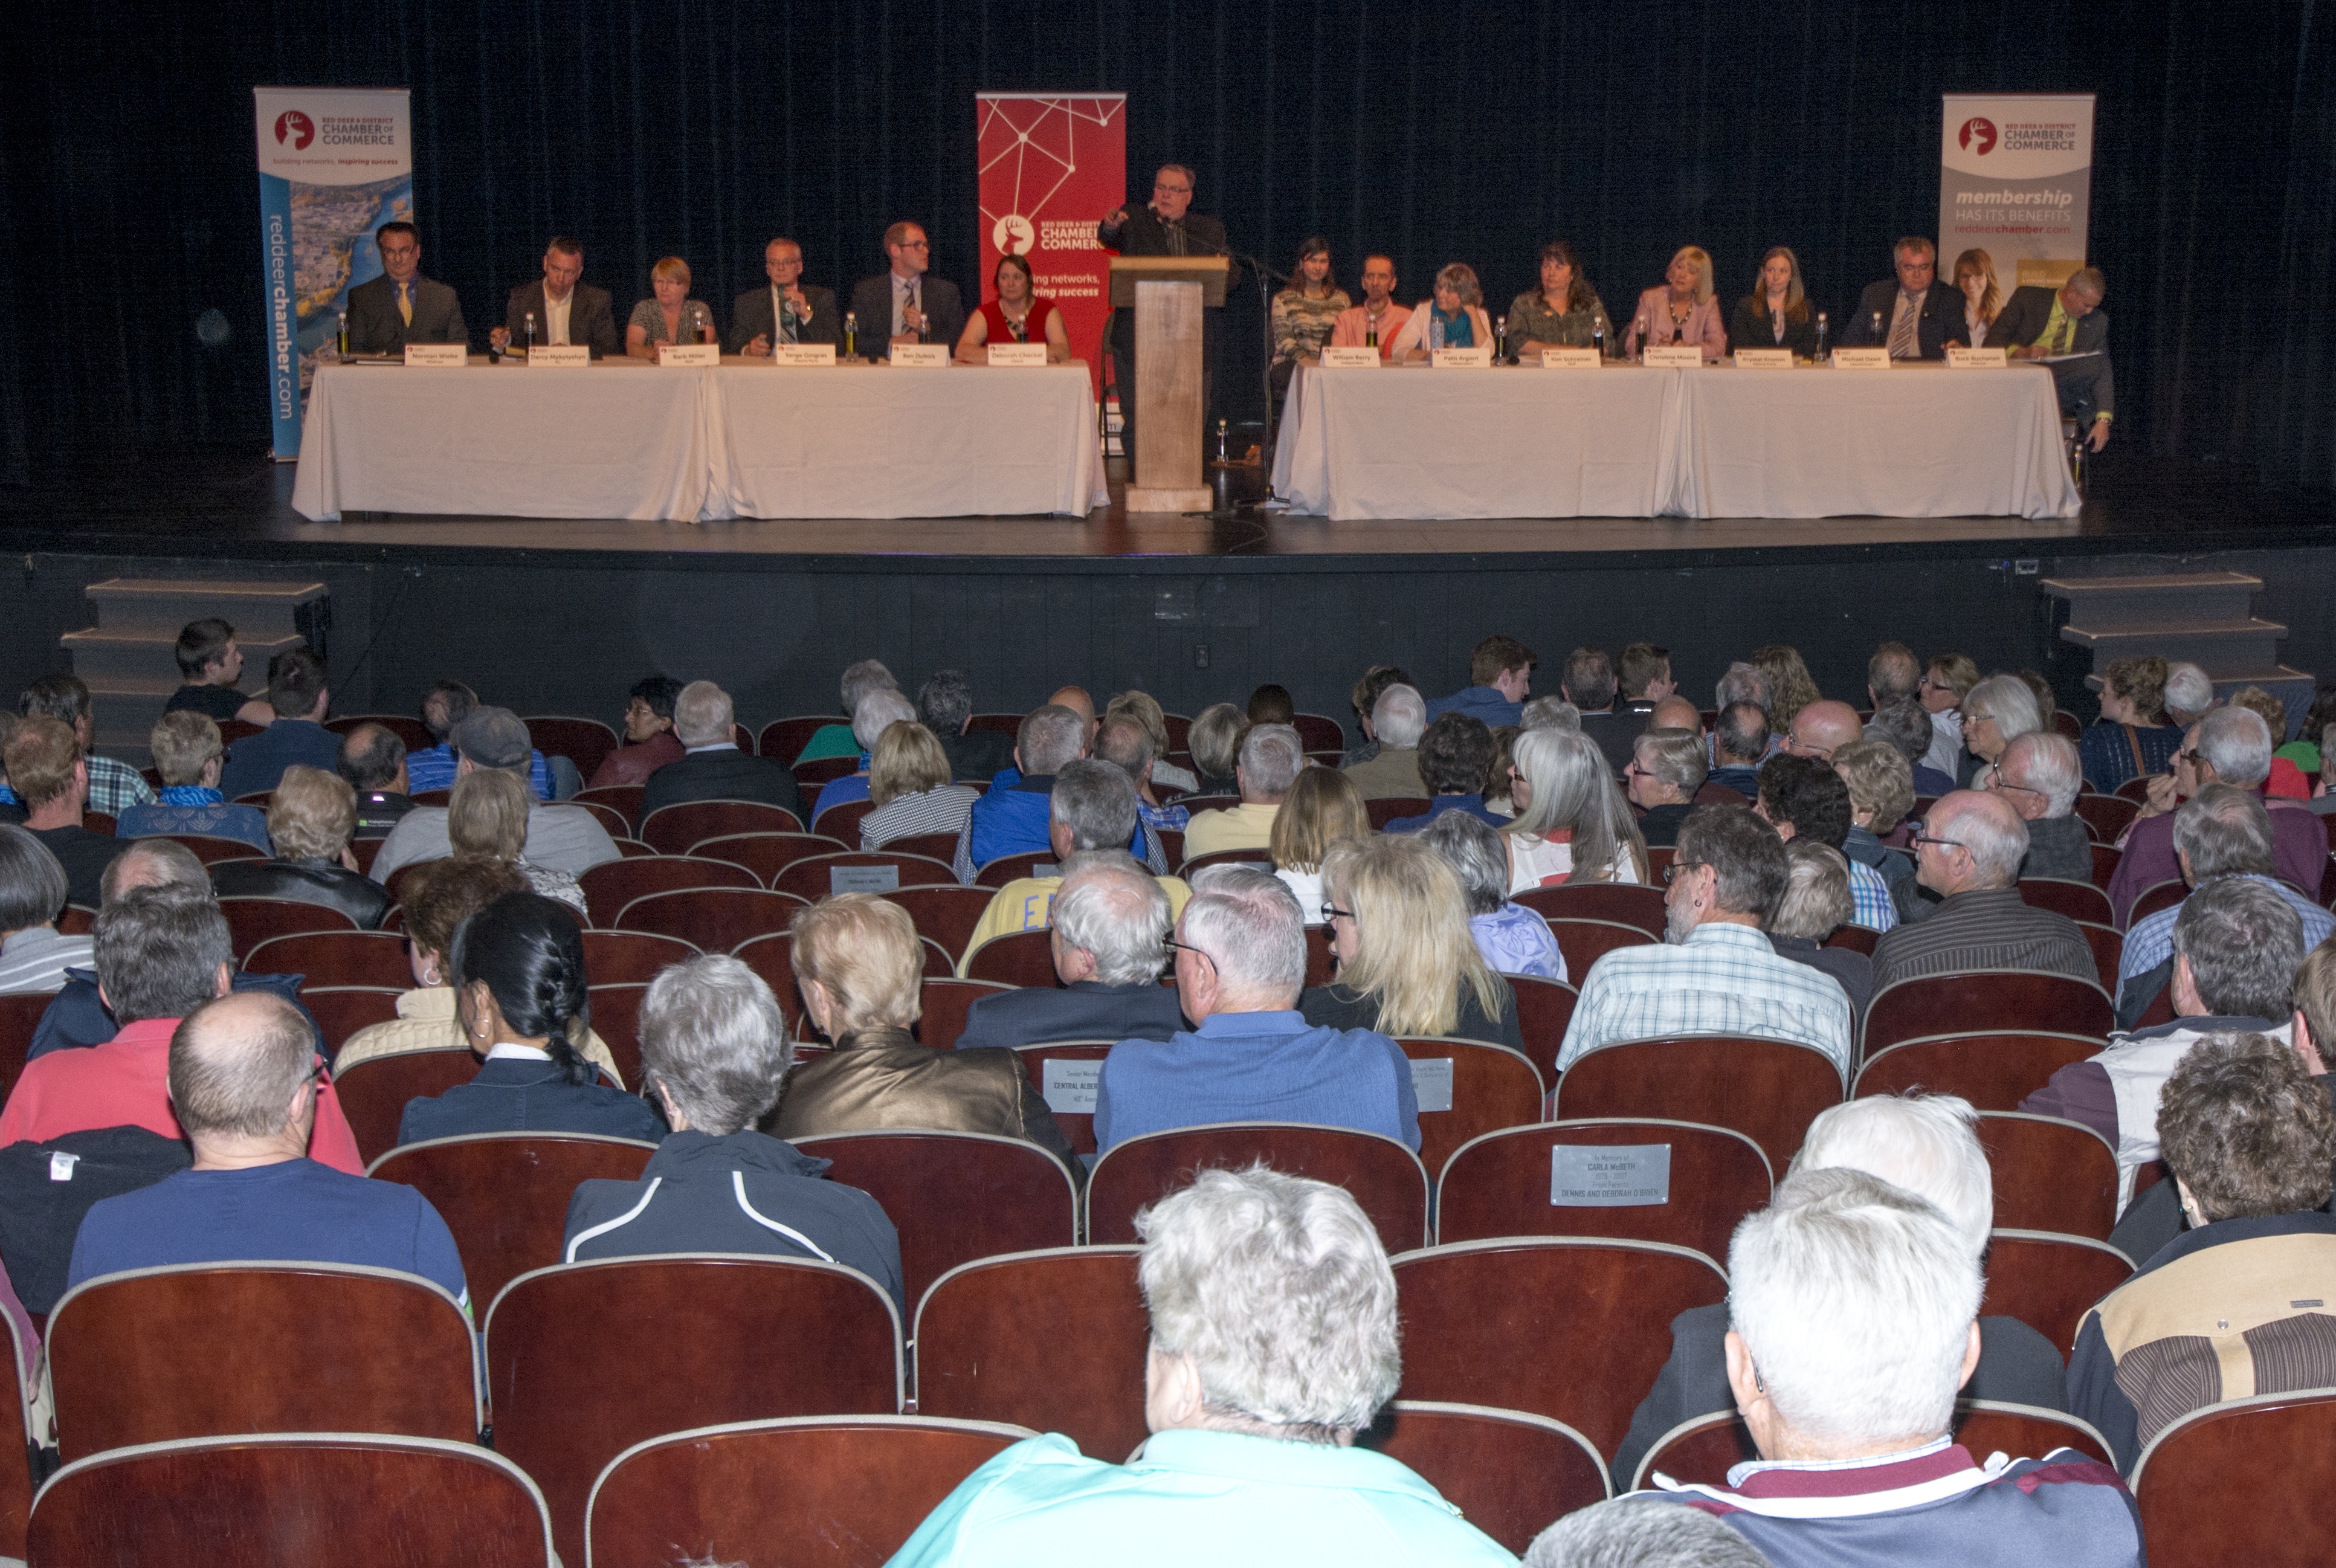 SHARING PLATFORMS – The candidates for the coming provincial election gathered Monday evening at the Memorial Centre to detail their platforms in front of a packed house.